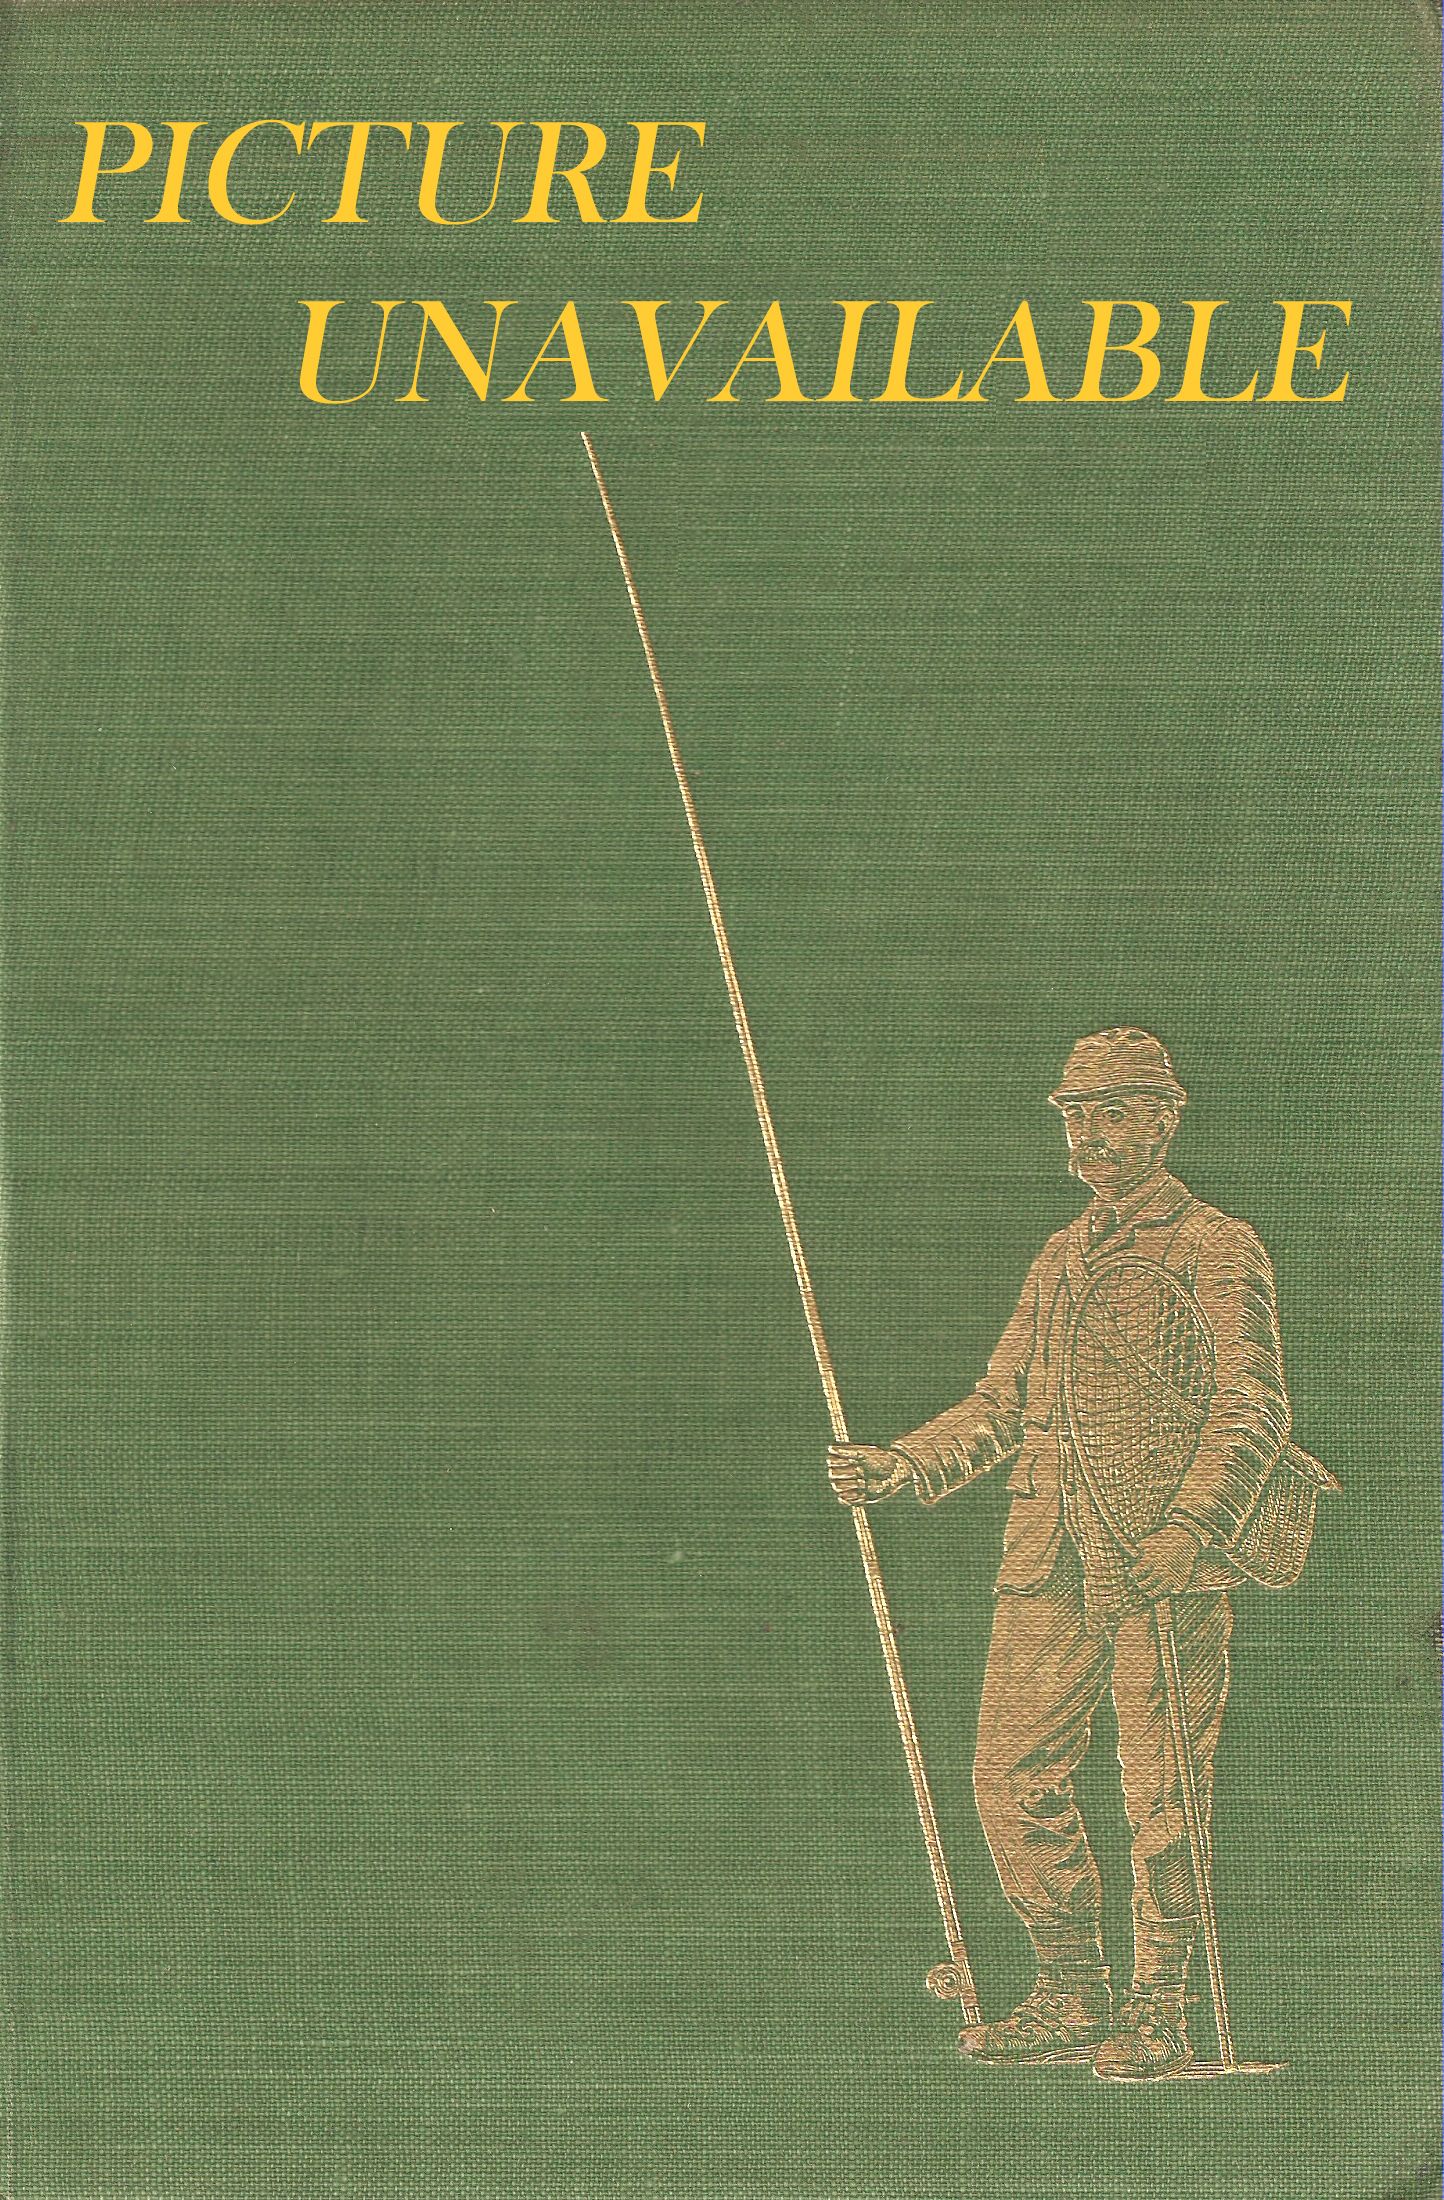 FISHING TACKLE OF YESTERDAY: A COLLECTOR'S GUIDE. By Jamie Maxtone Graham.